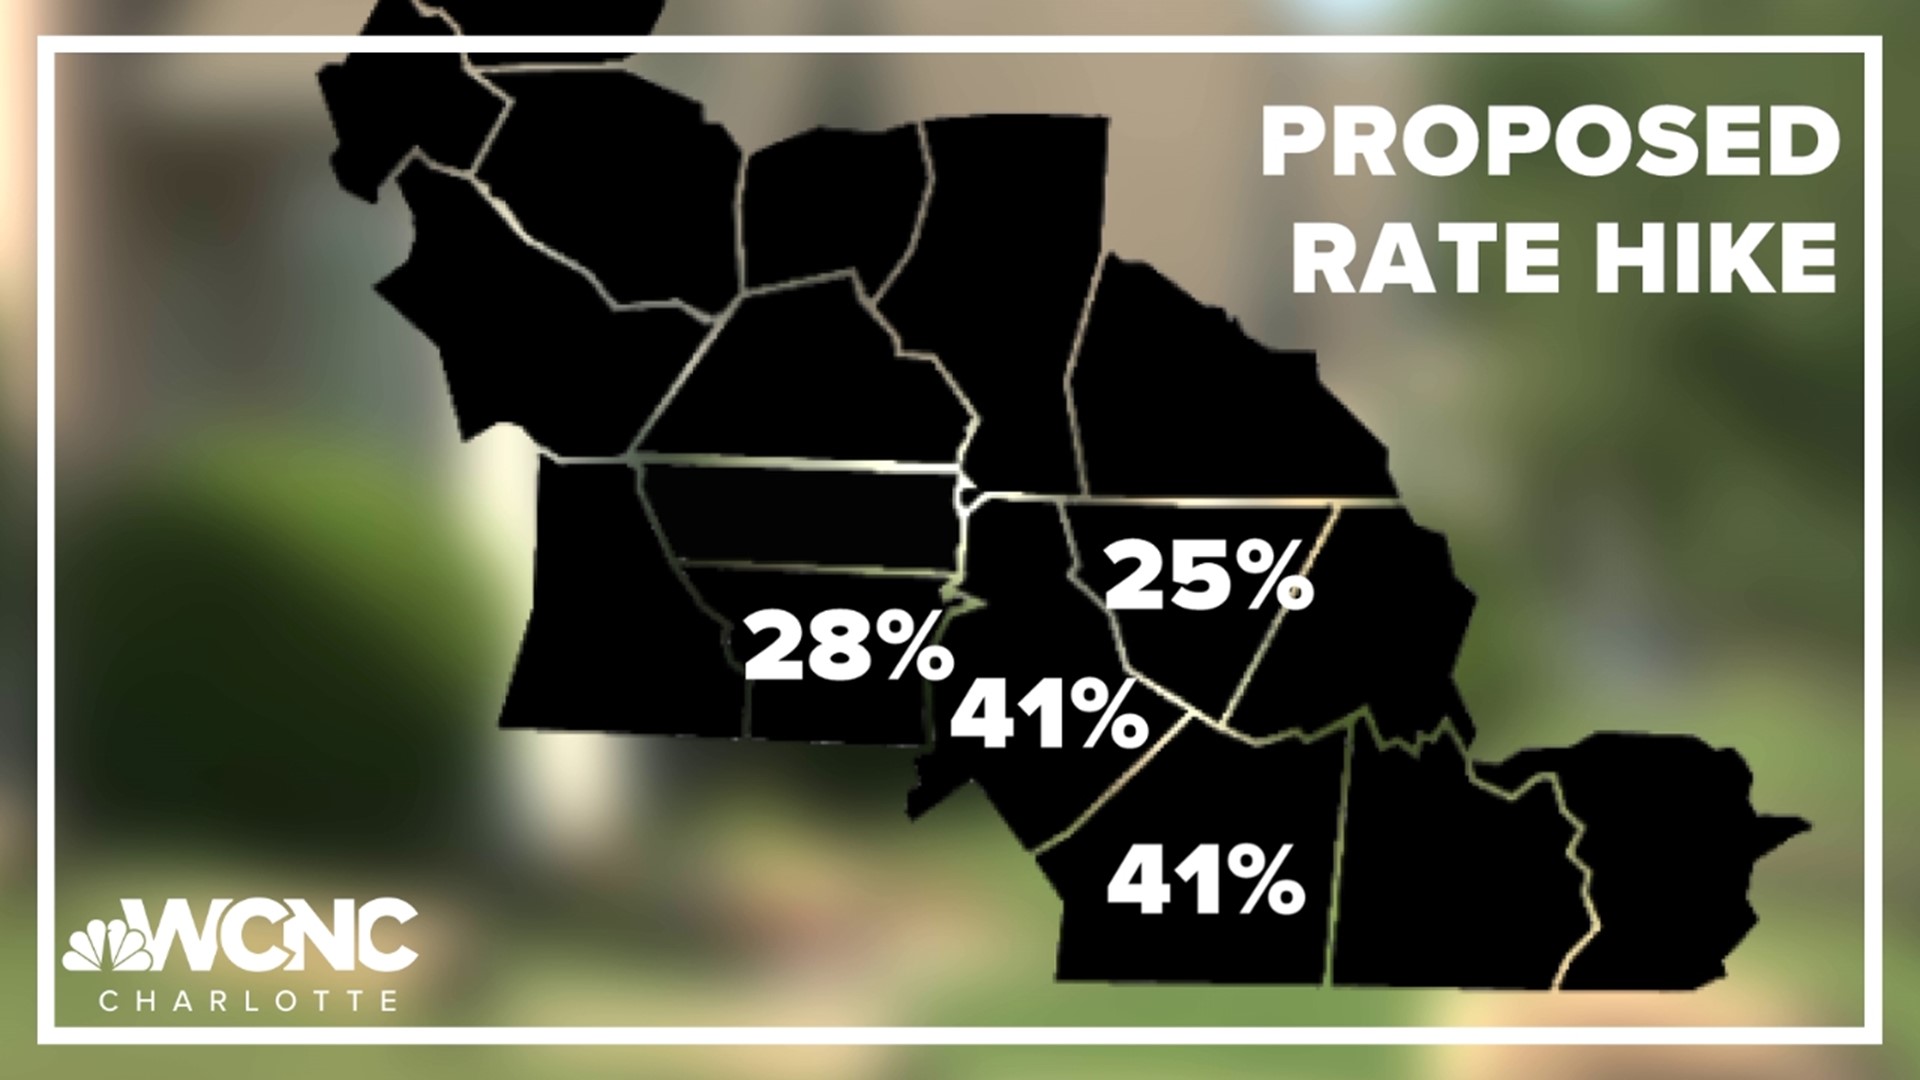 The proposal could increase insurance rates by an average of 42% across North Carolina.